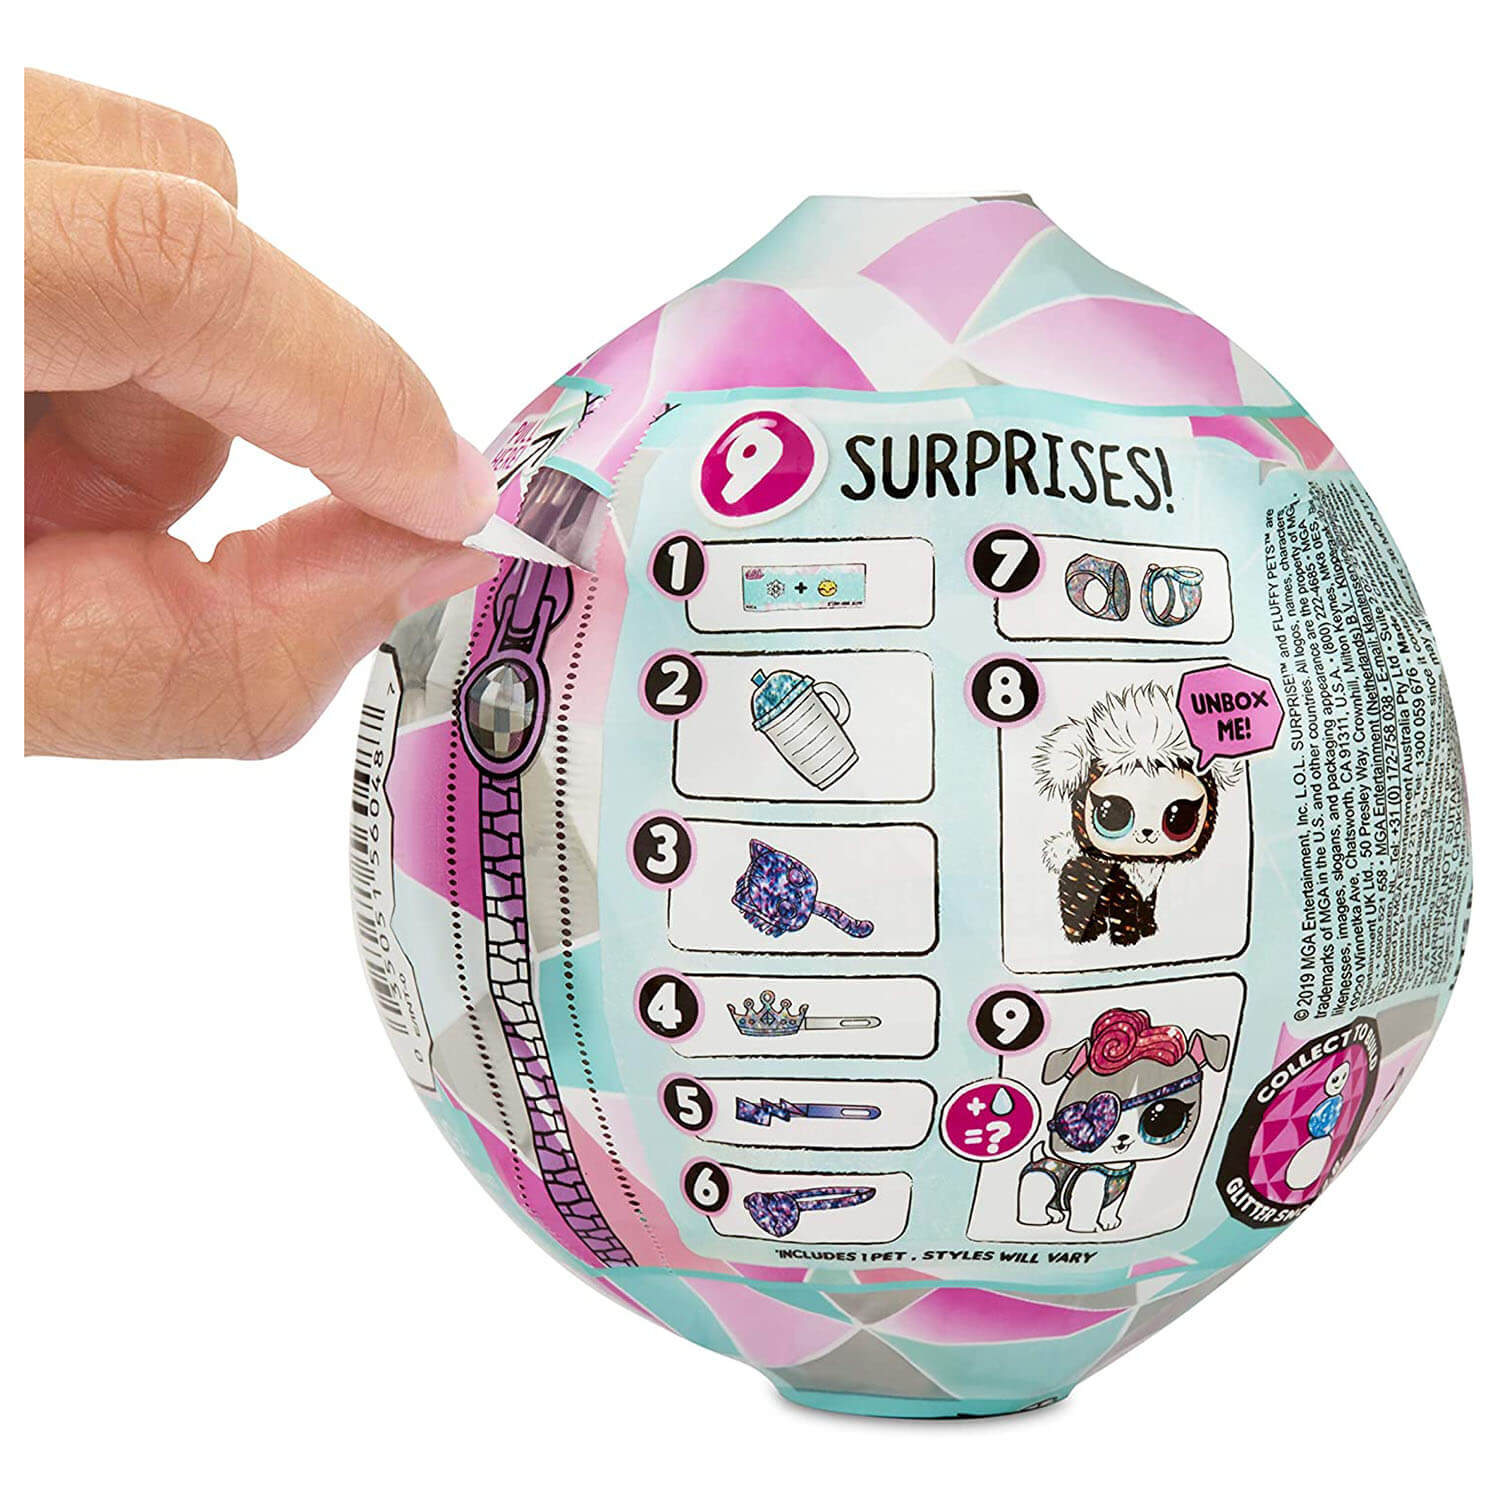 Back view of the L.O.L. Surprise Fluffy Pets package.